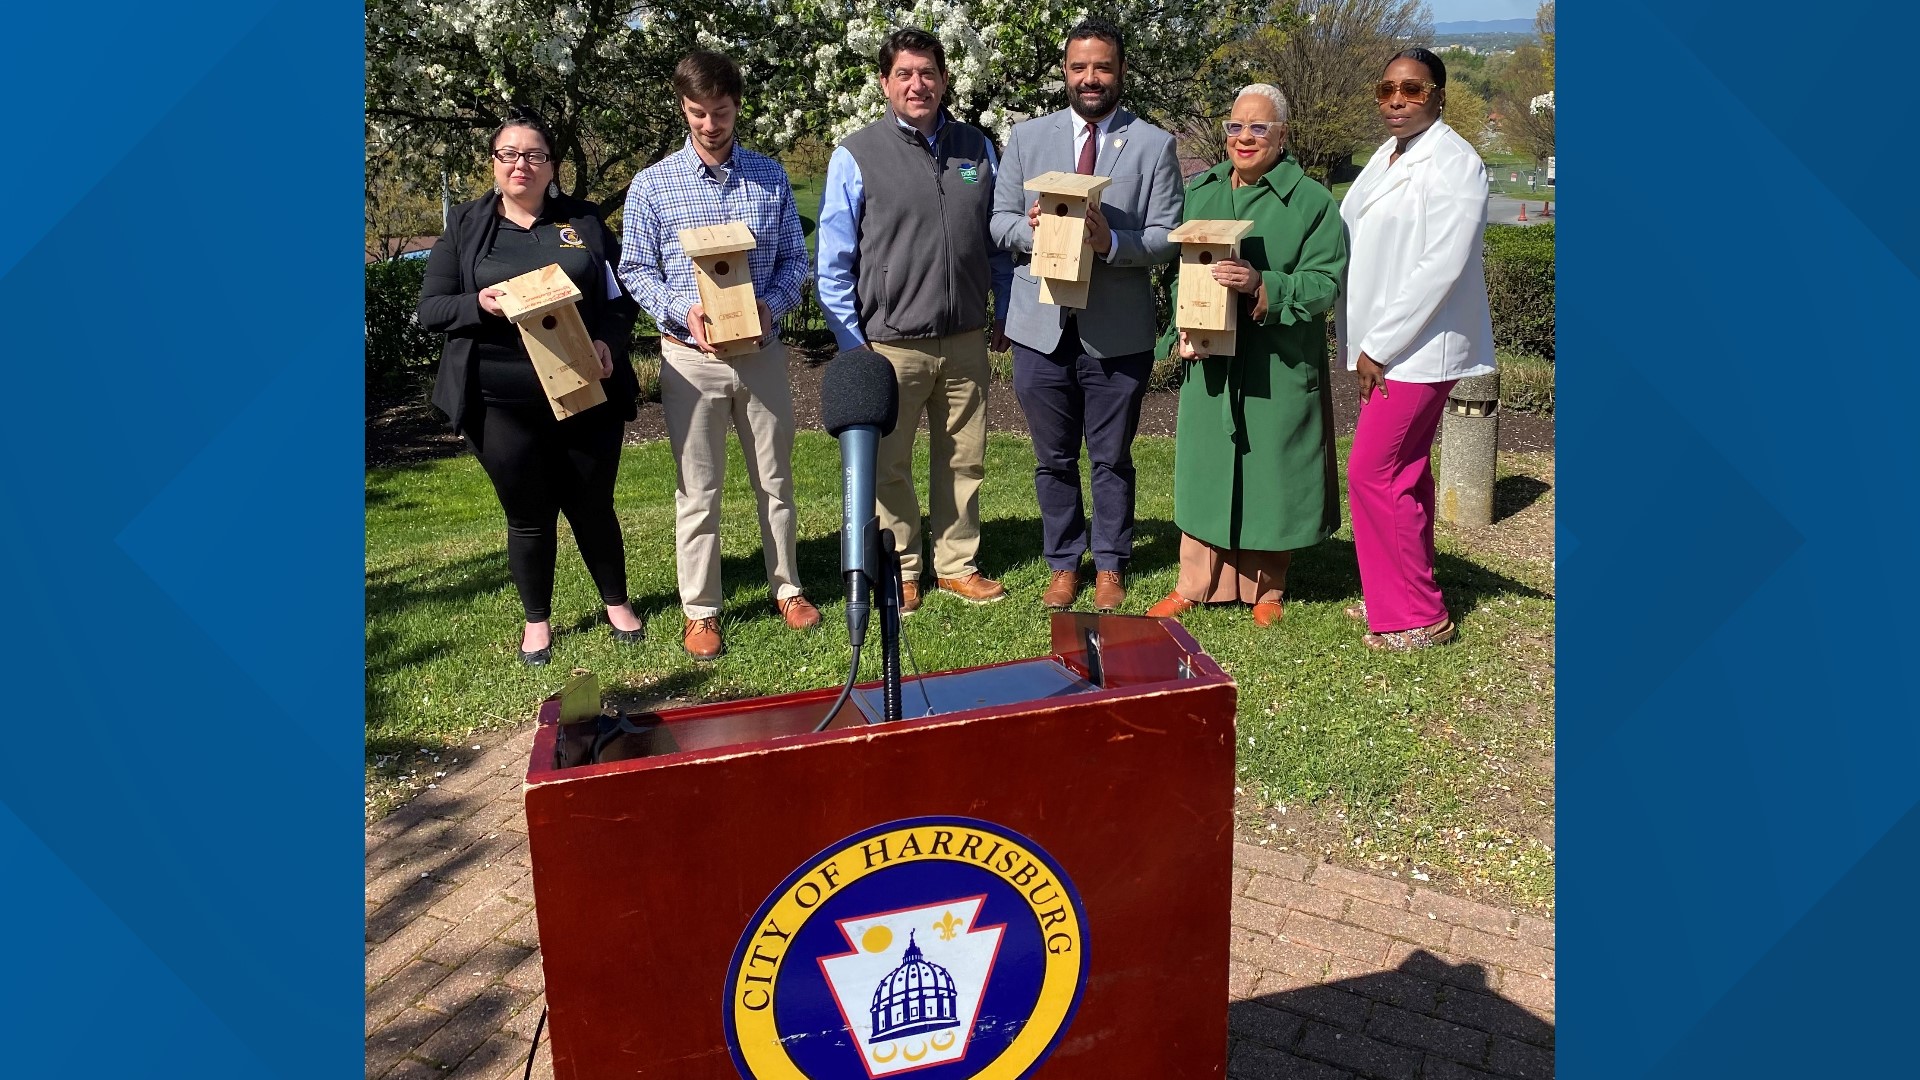 Harrisburg leaders outlined future plans to help the environment in celebration of Earth Day on Monday.